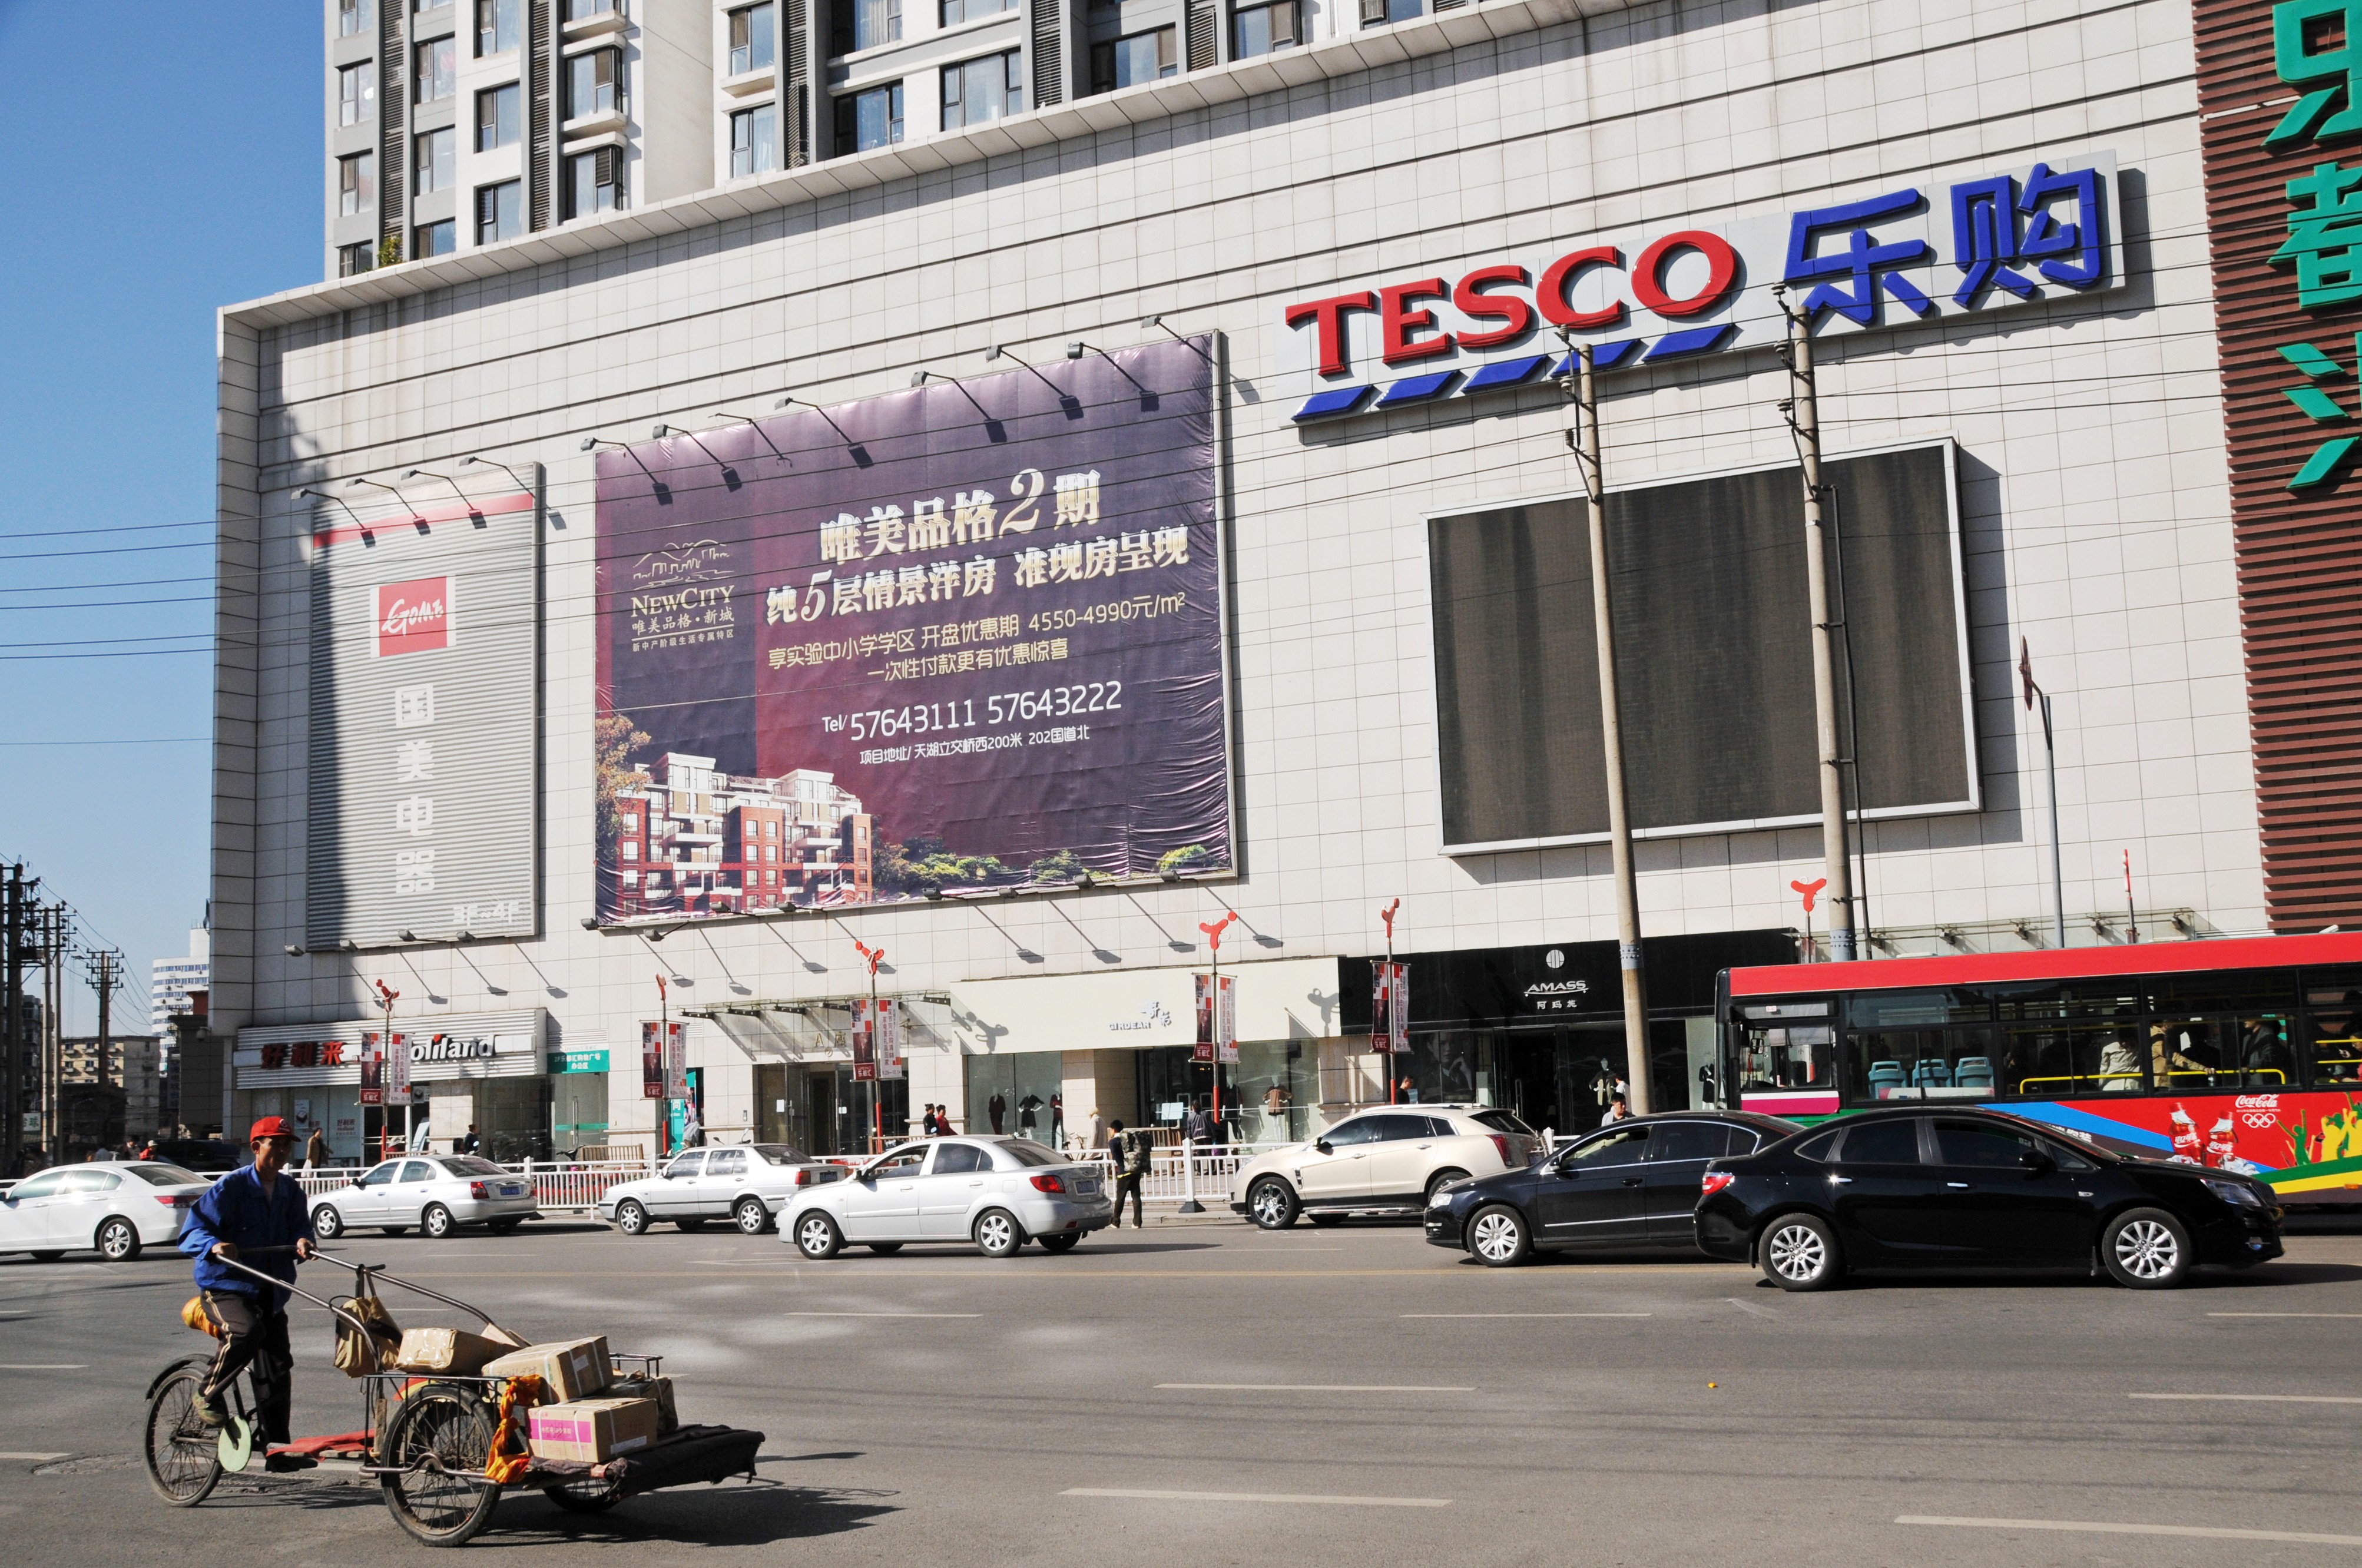 A Tesco shopping complex in Fushun, northeast China. The British grocery retailer Tesco became the latest to pull back from Asia after it agreed to sell its Thailand and Malaysia businesses to CP Group. Photo: SCMP